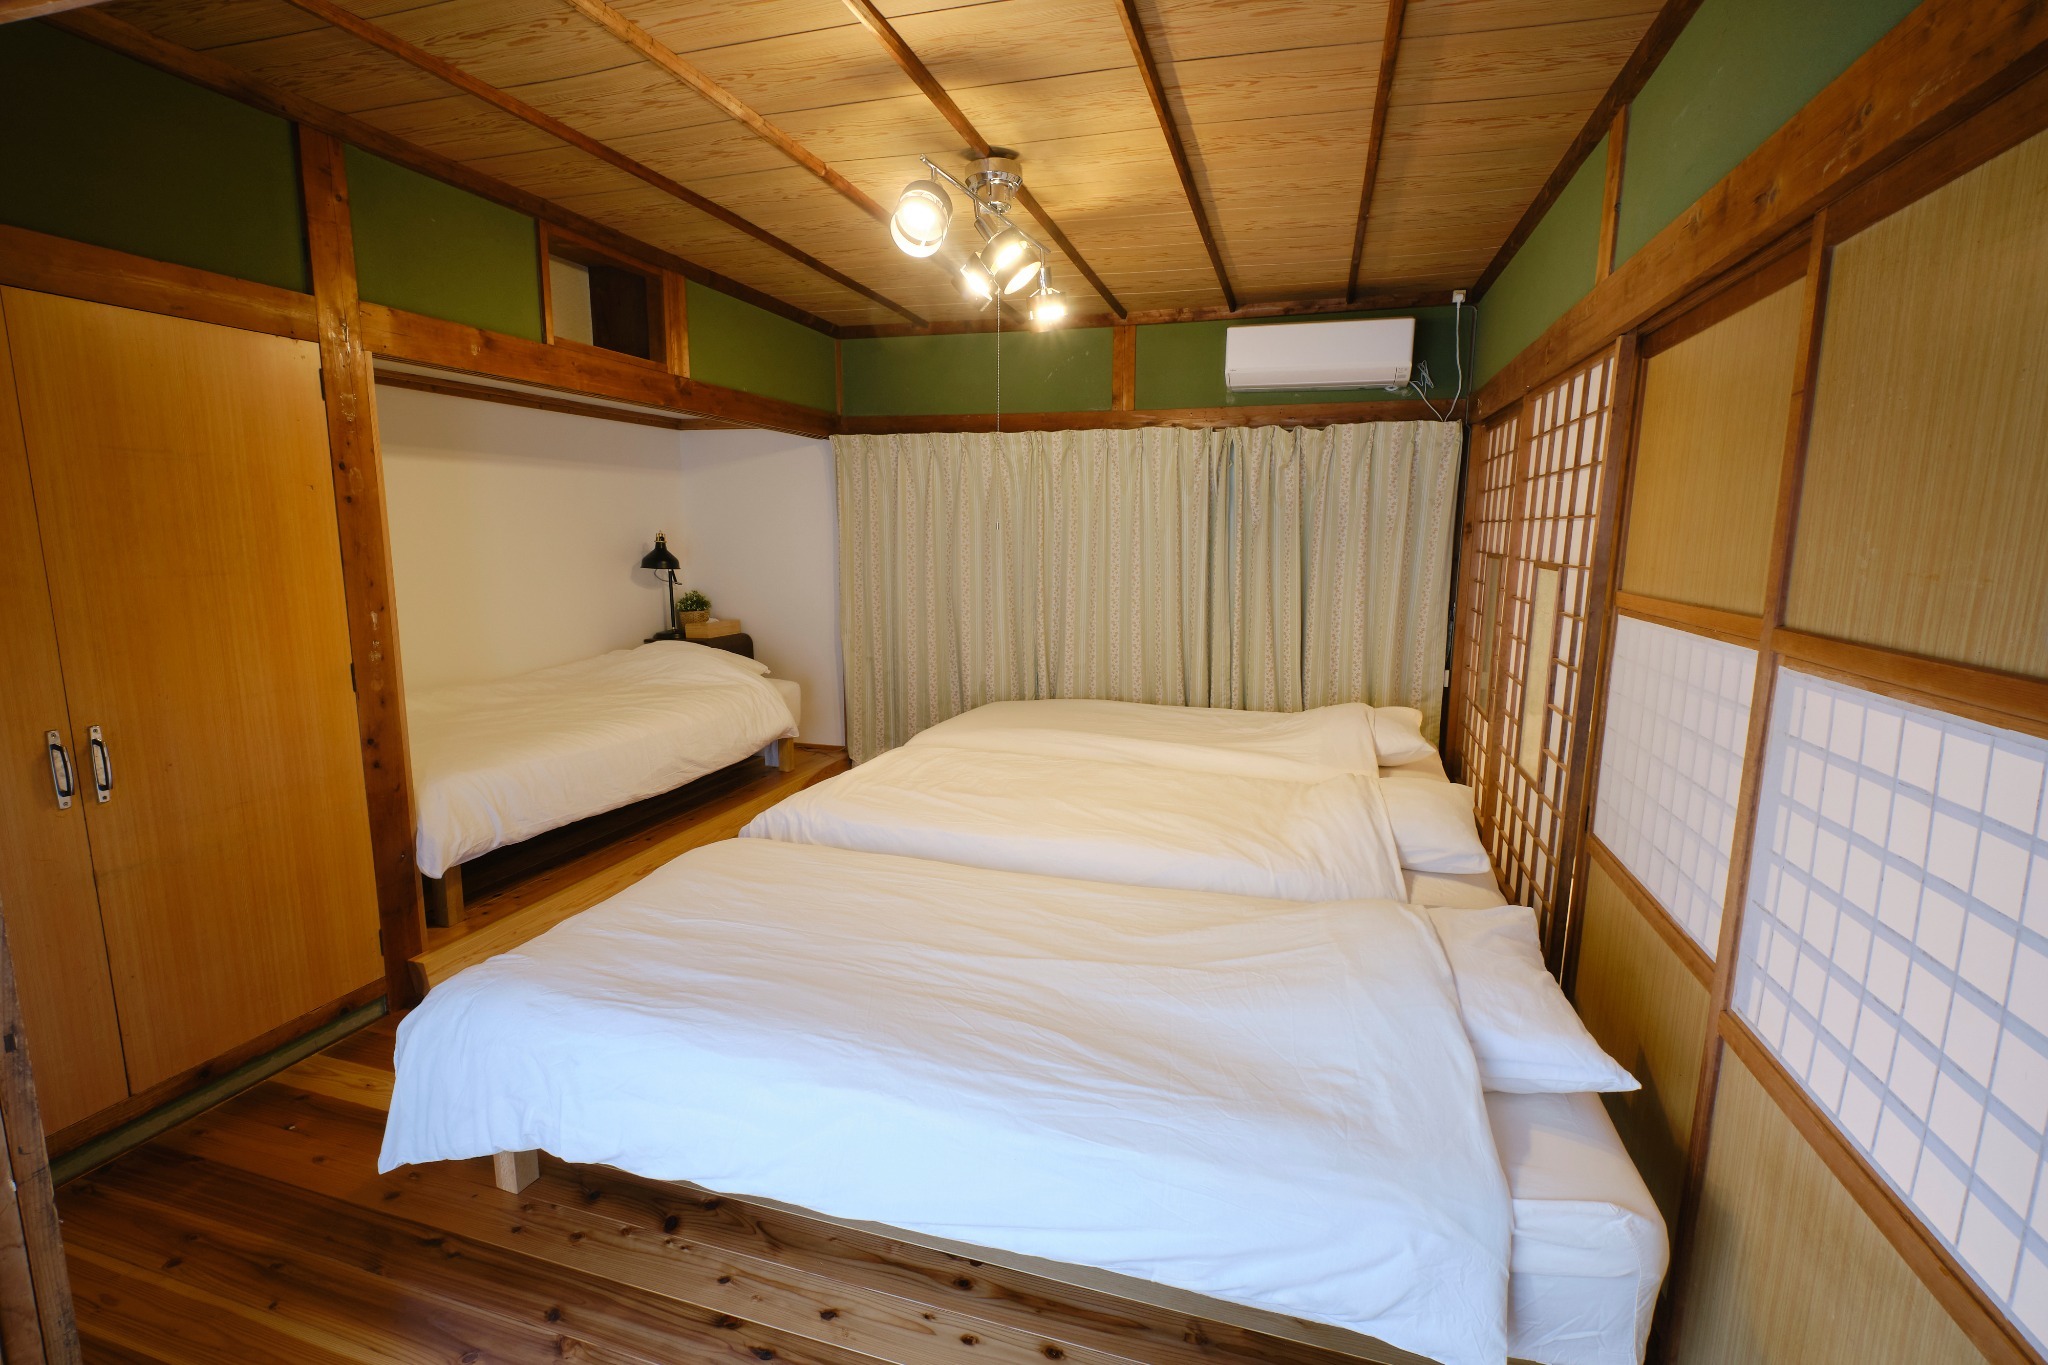 here are 4 single bed in the bedroom. When 5 or 6 people come, please use the living room. ベッドルームにはシングルベッドが4台あります。 56名でお越しの際は、リビングをご利用ください。